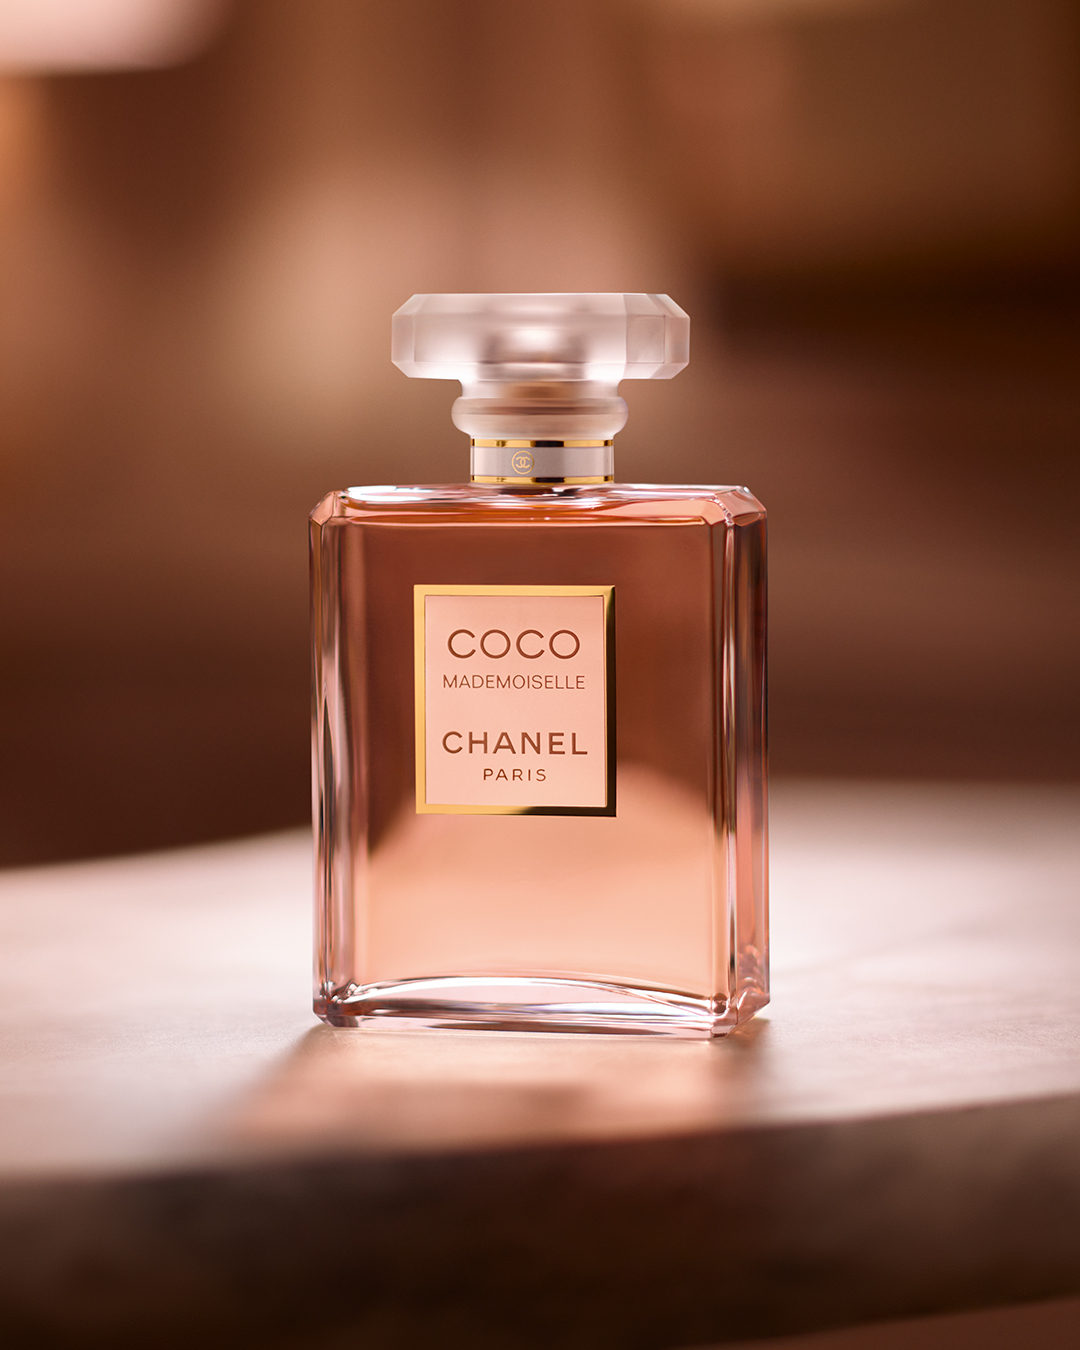 Sephora - Discover CHANEL COCO MADEMOISELLE Eau de Parfum, a vibrant  fragrance featuring notes of jasmine, May rose, patchouli, and vetiver.